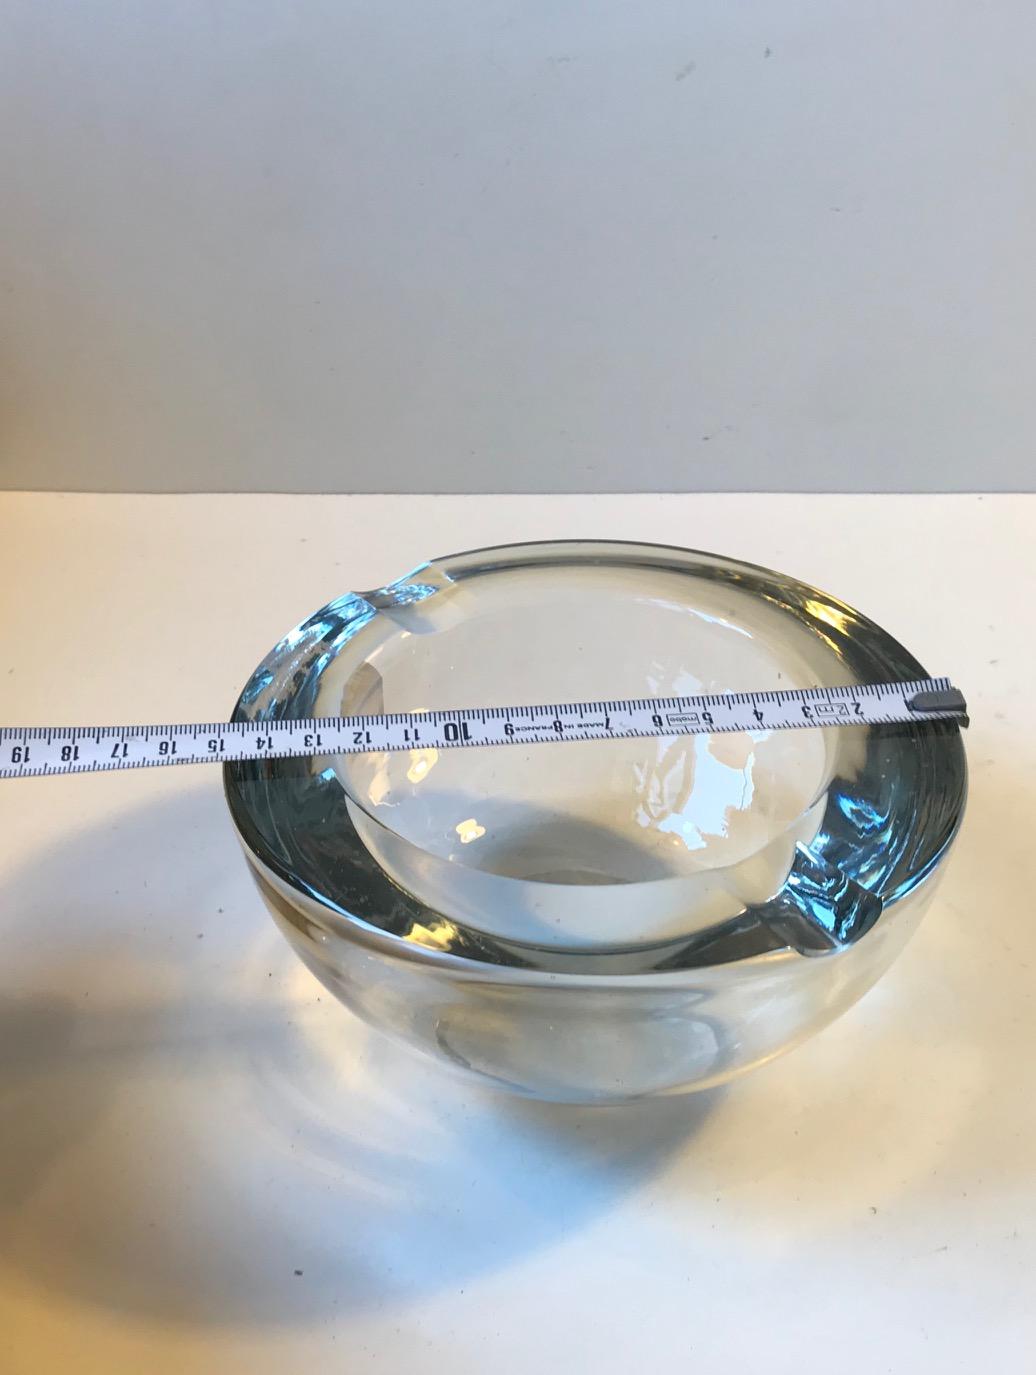 Thick and heavy cigar ashtray. It is made from polished lead crystal. Signed and numbered beneath its base. The signature looks like EH so it was probably designed by Erik Hoglund.